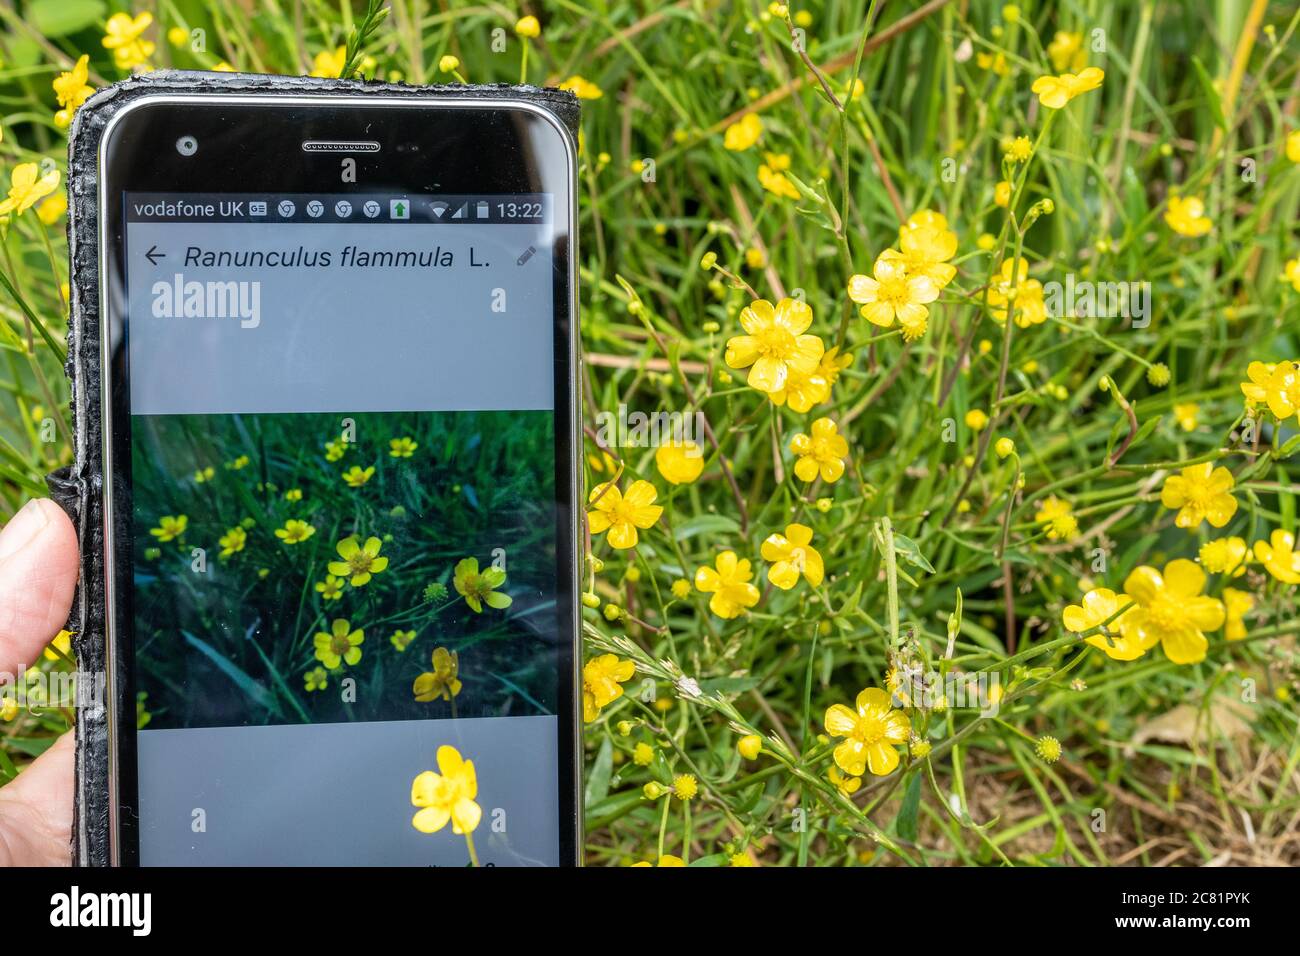 Plantnet app on a mobile phone for identification or ID of plants (flora), next to lesser spearwort (Ranunculus flammula) Stock Photo